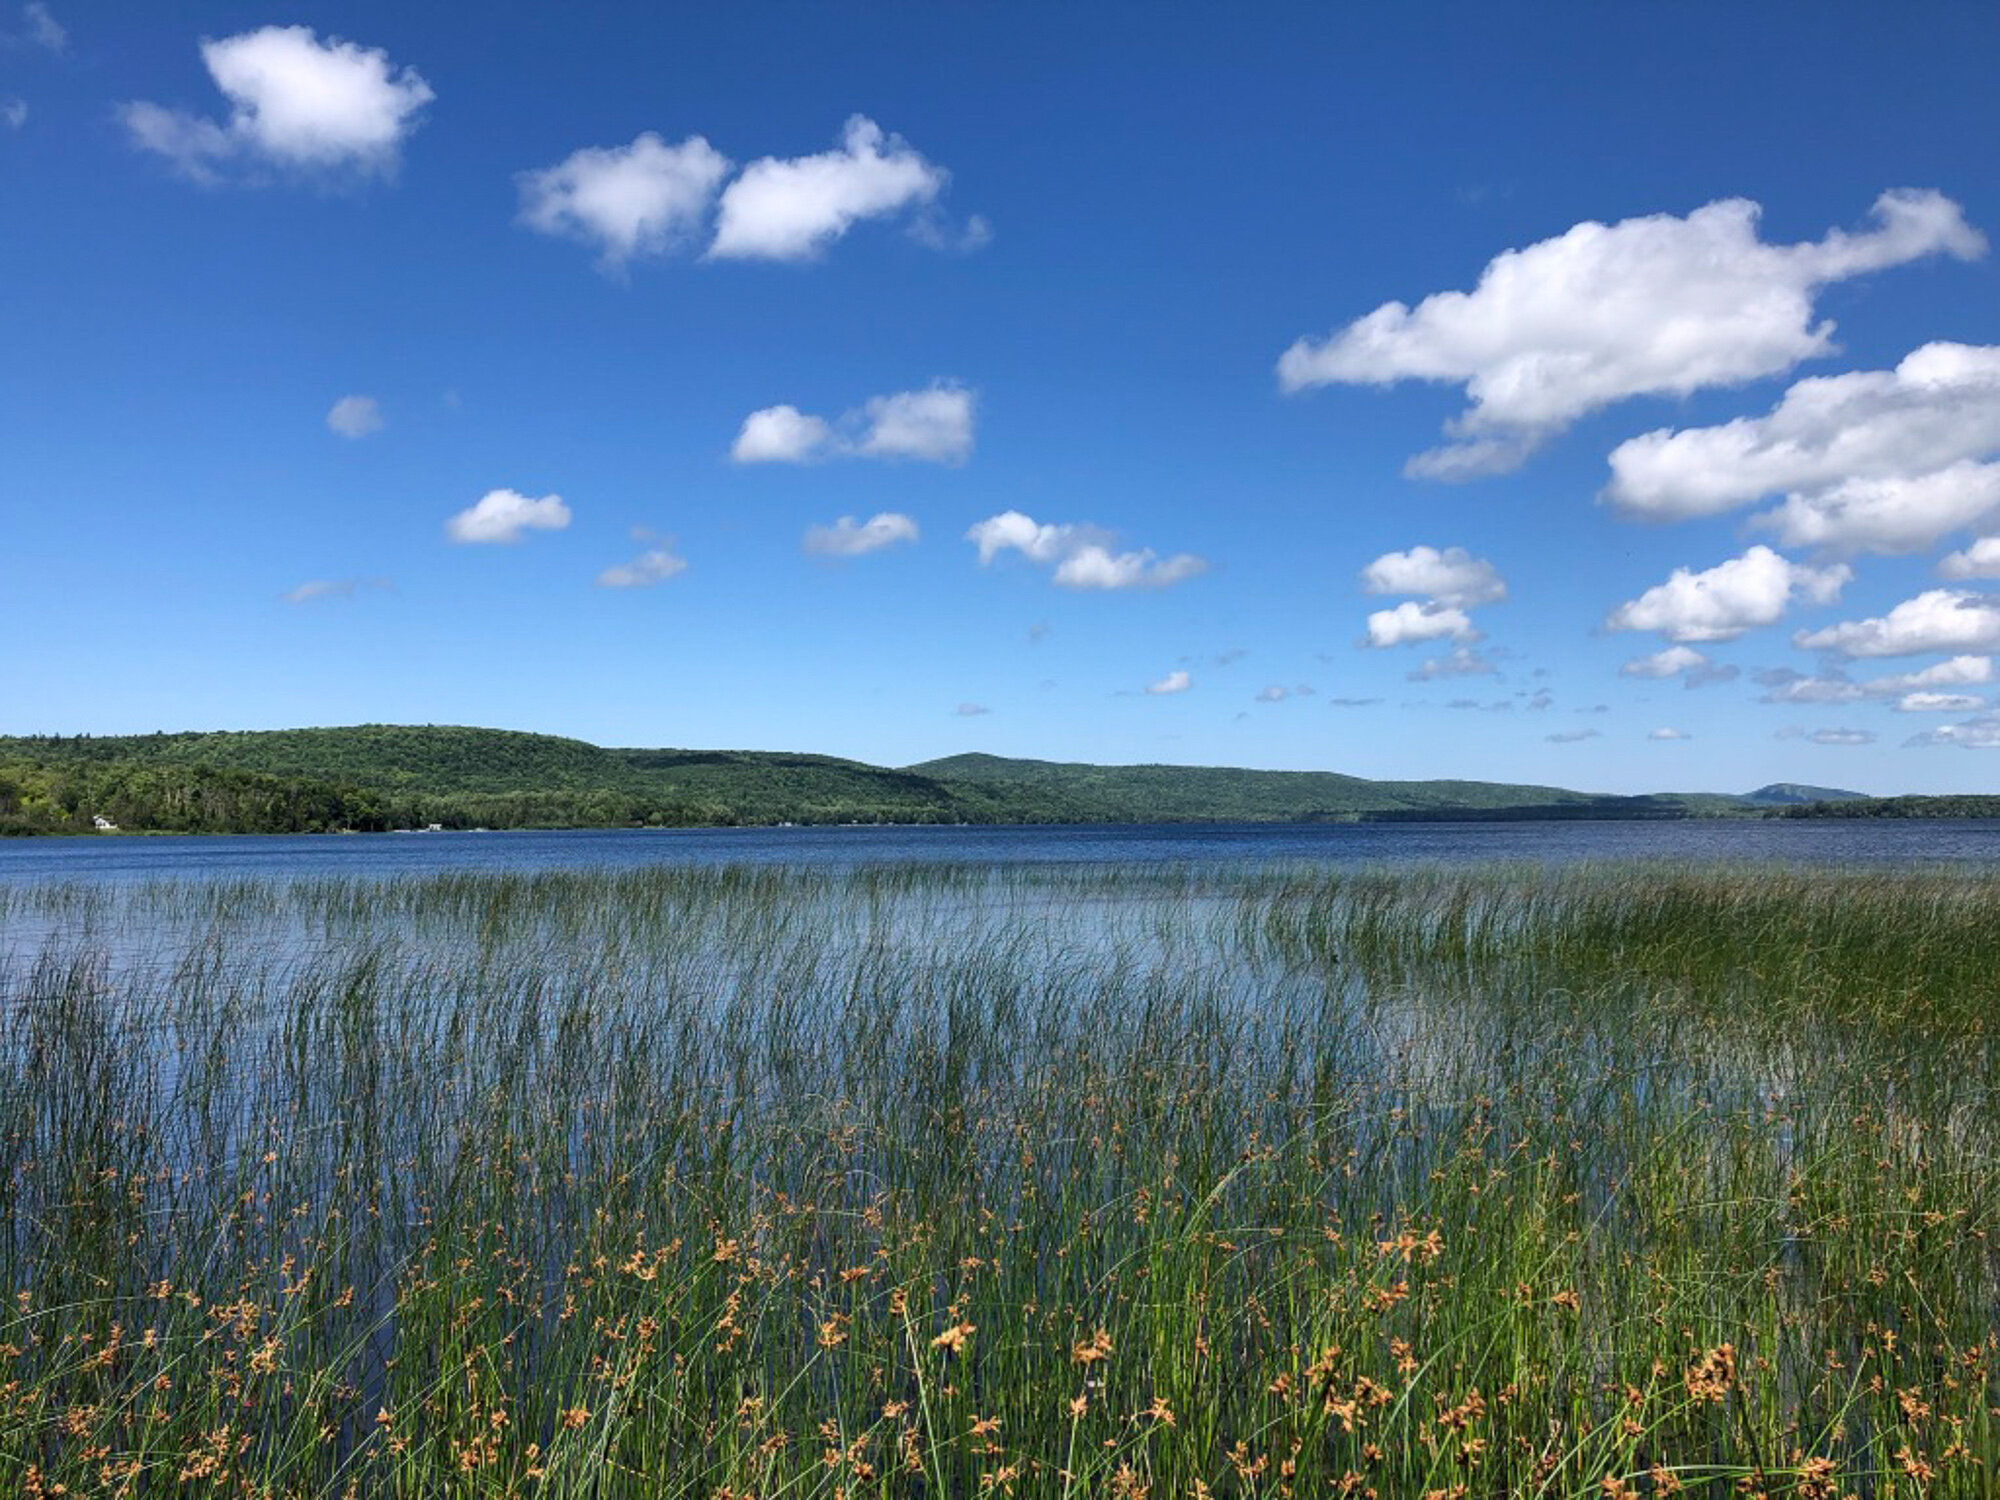   The view from a stretch of sandy shoreline on the west end of Gratiot Lake, acquired by GLC in 2014-2016. Natural shoreline owned by GLC is open to the public for hiking and accessible from the water by boat.  